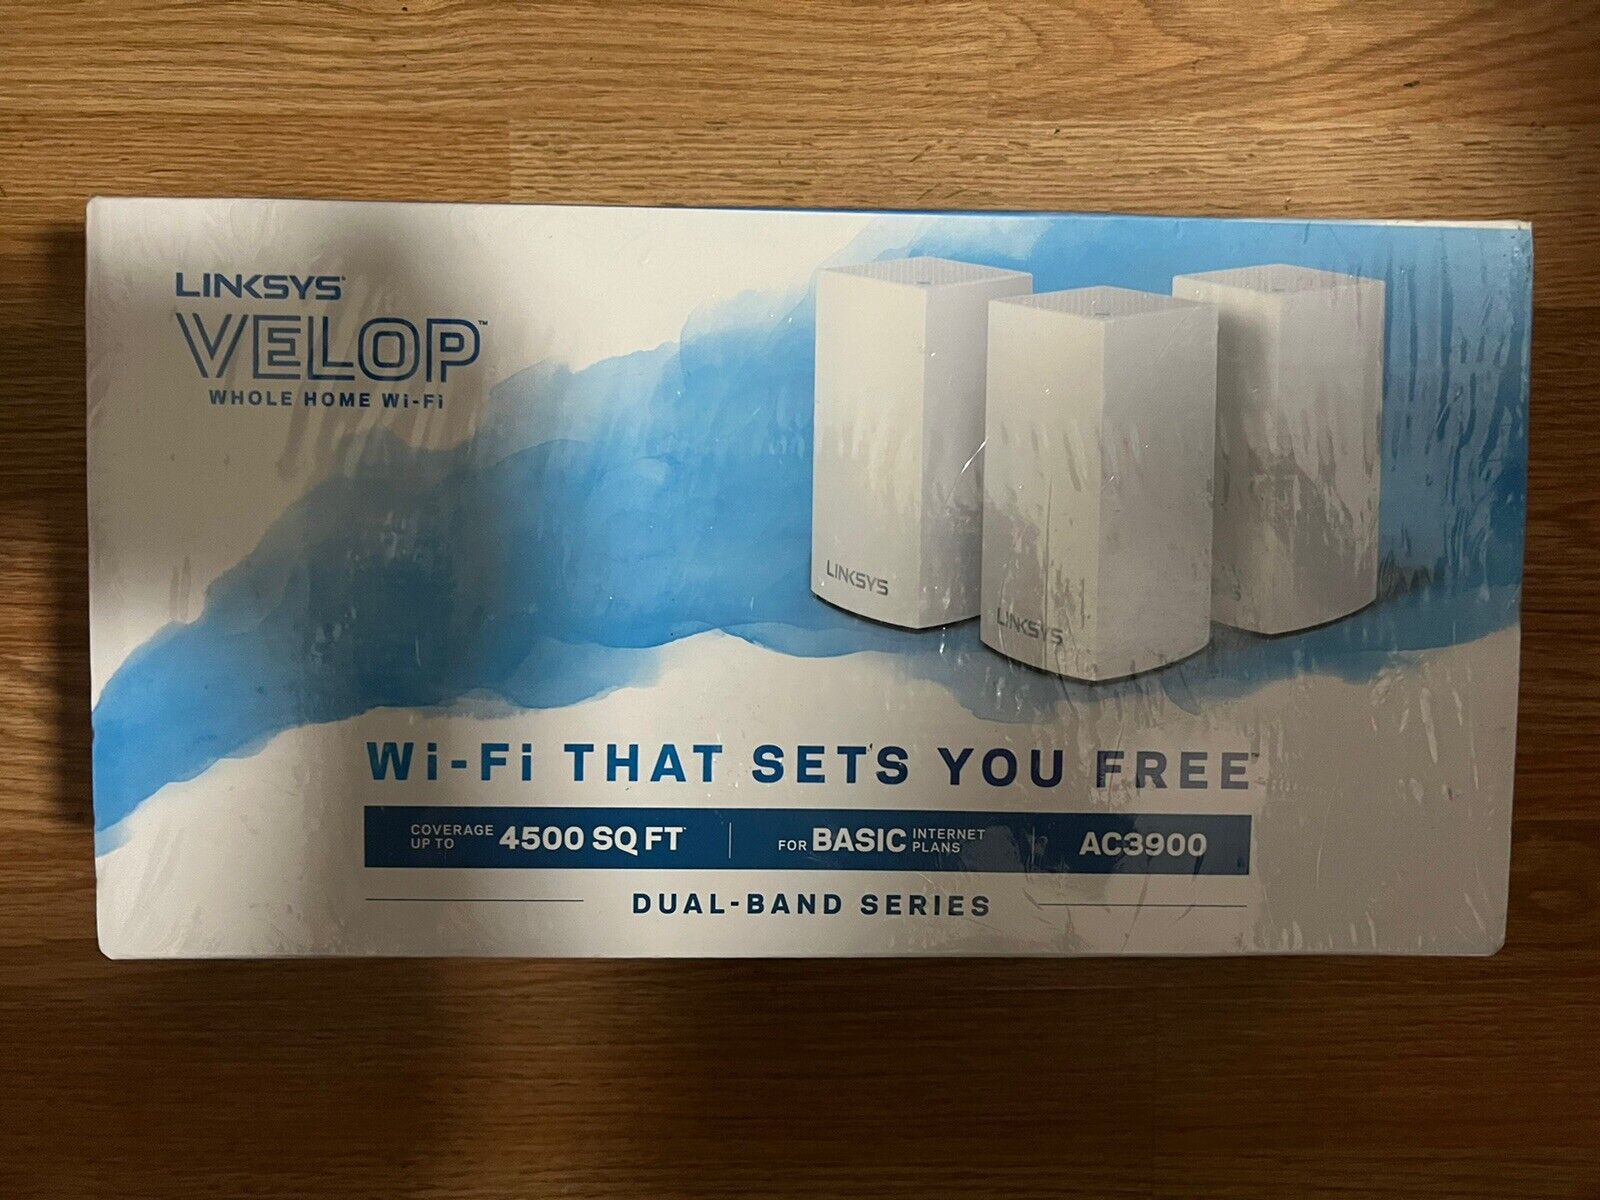 Linksys VELOP 3 Set 4500 Sq Ft AC3900 Dual Band Intelligent WiFi Factory Sealed.